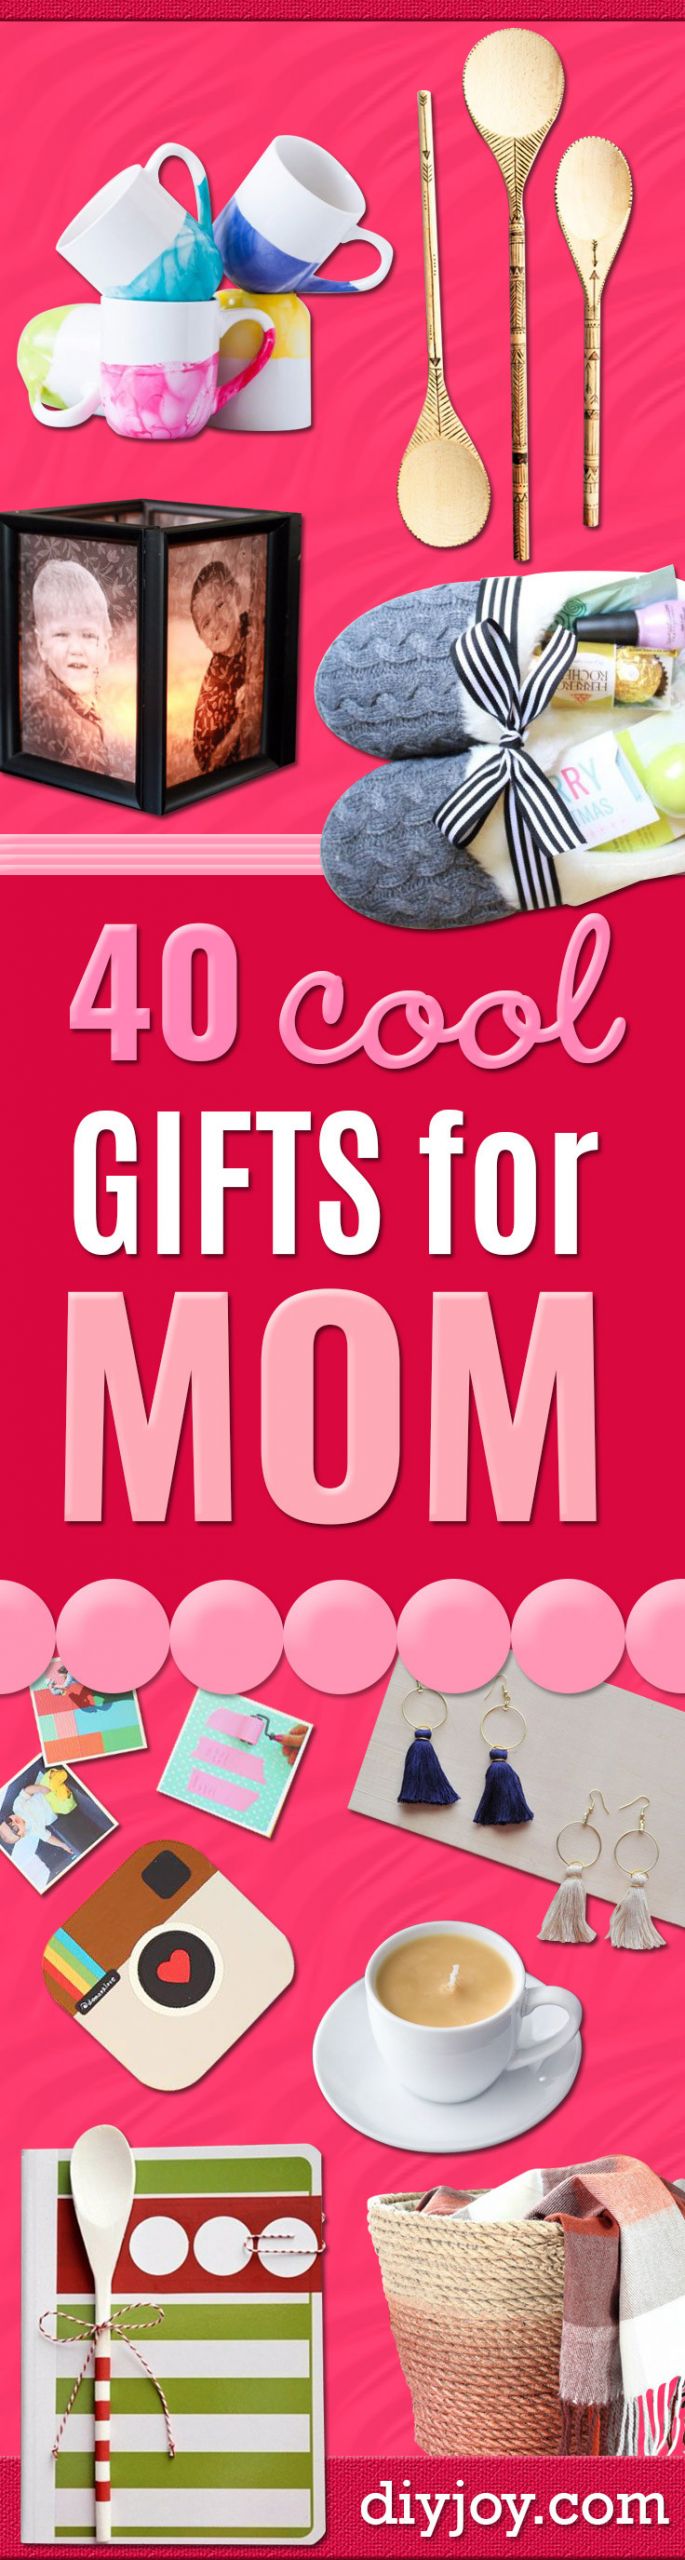 DIY Gift For Your Mom
 40 Coolest Gifts To Make for Mom